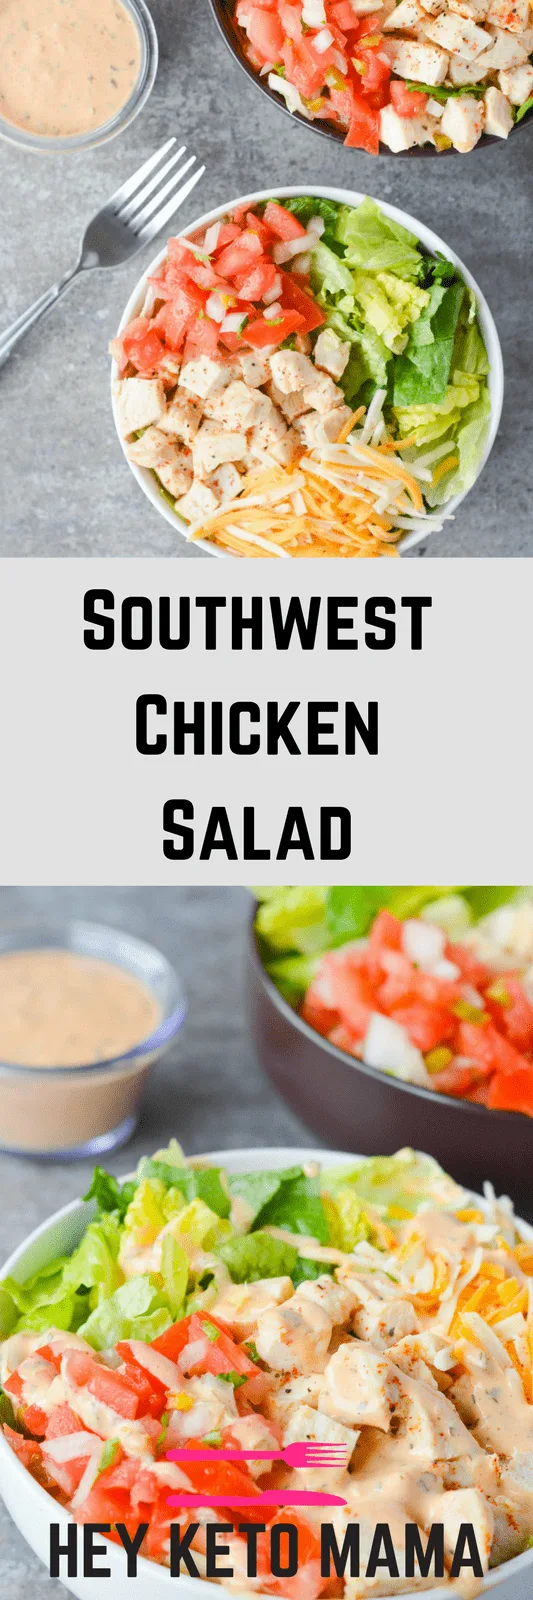 The Southwest Chicken Salad is one of my all time favorites. It's crisp, refreshing, and has just the right amount of kick. This dish is PERFECT for Spring afternoon. | heyketomama.com